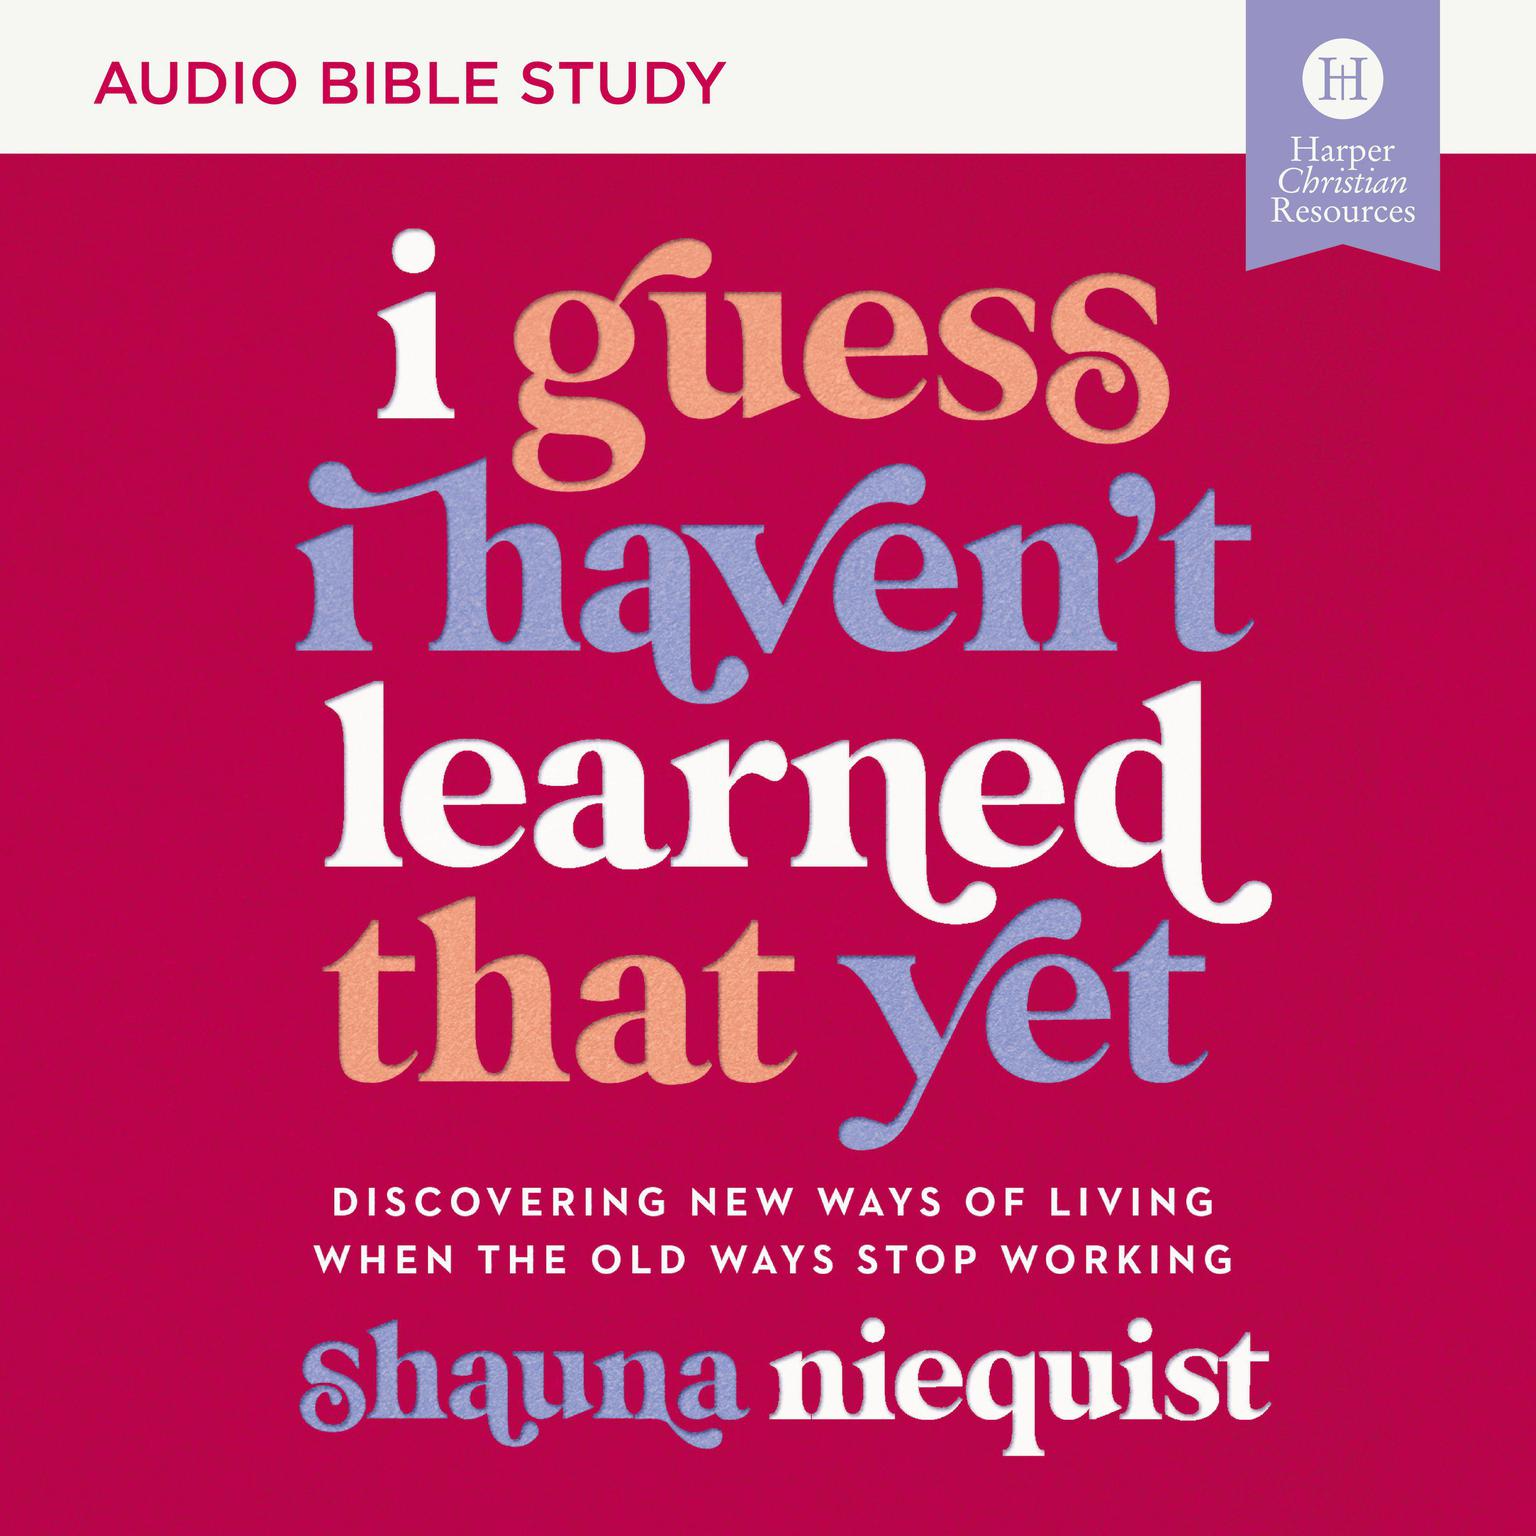 I Guess I Havent Learned That Yet: Audio Bible Studies: Discovering New Ways of Living When the Old Ways Stop Working Audiobook, by Shauna Niequist